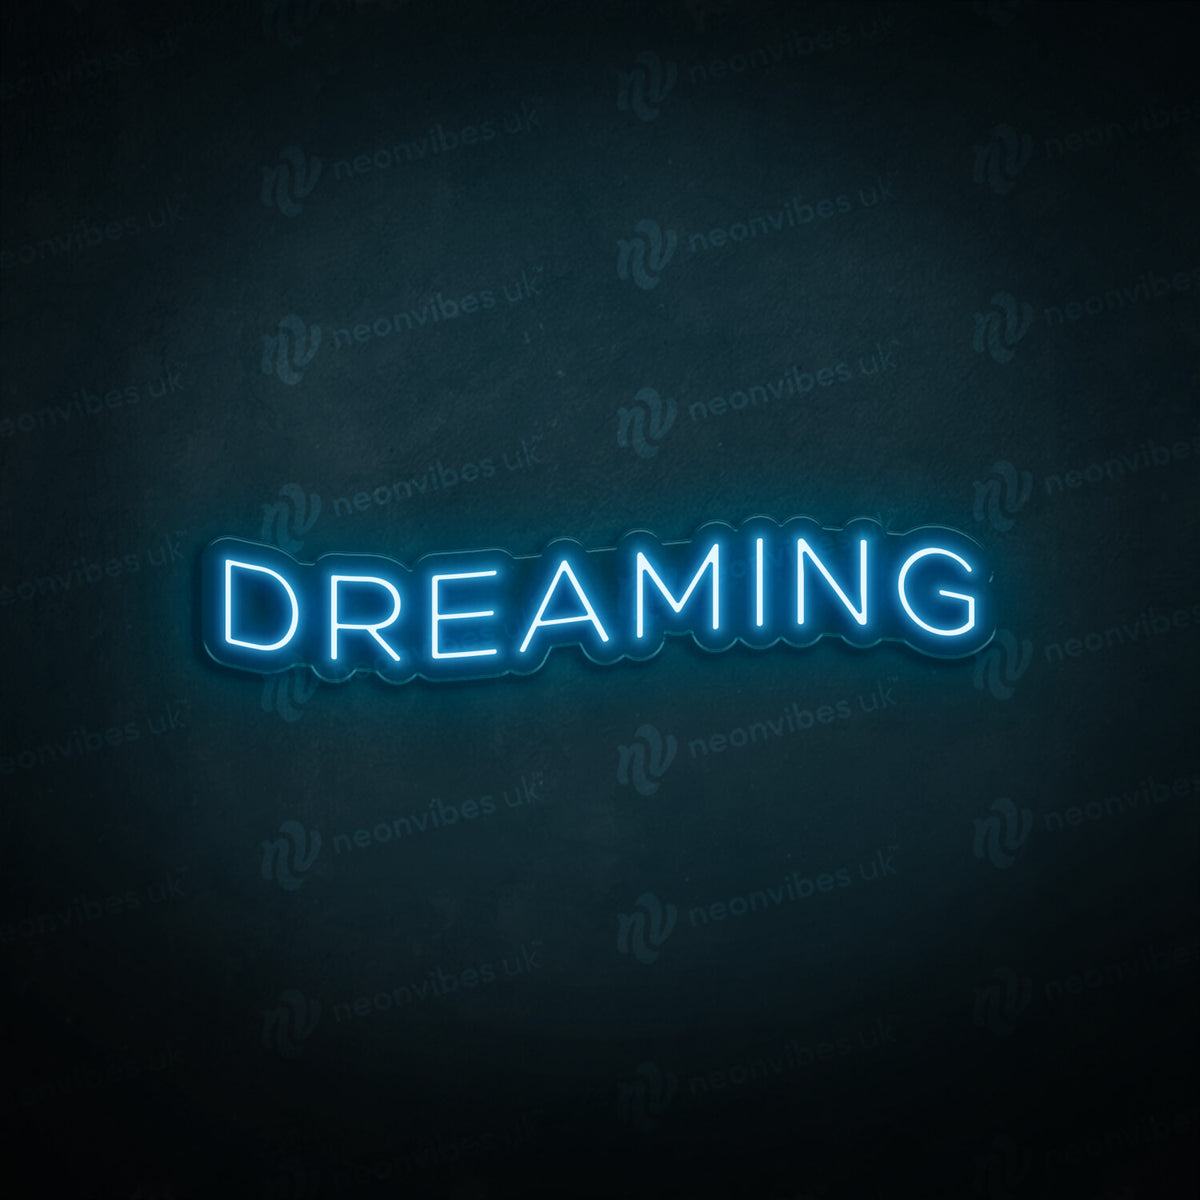 Dreaming neon sign